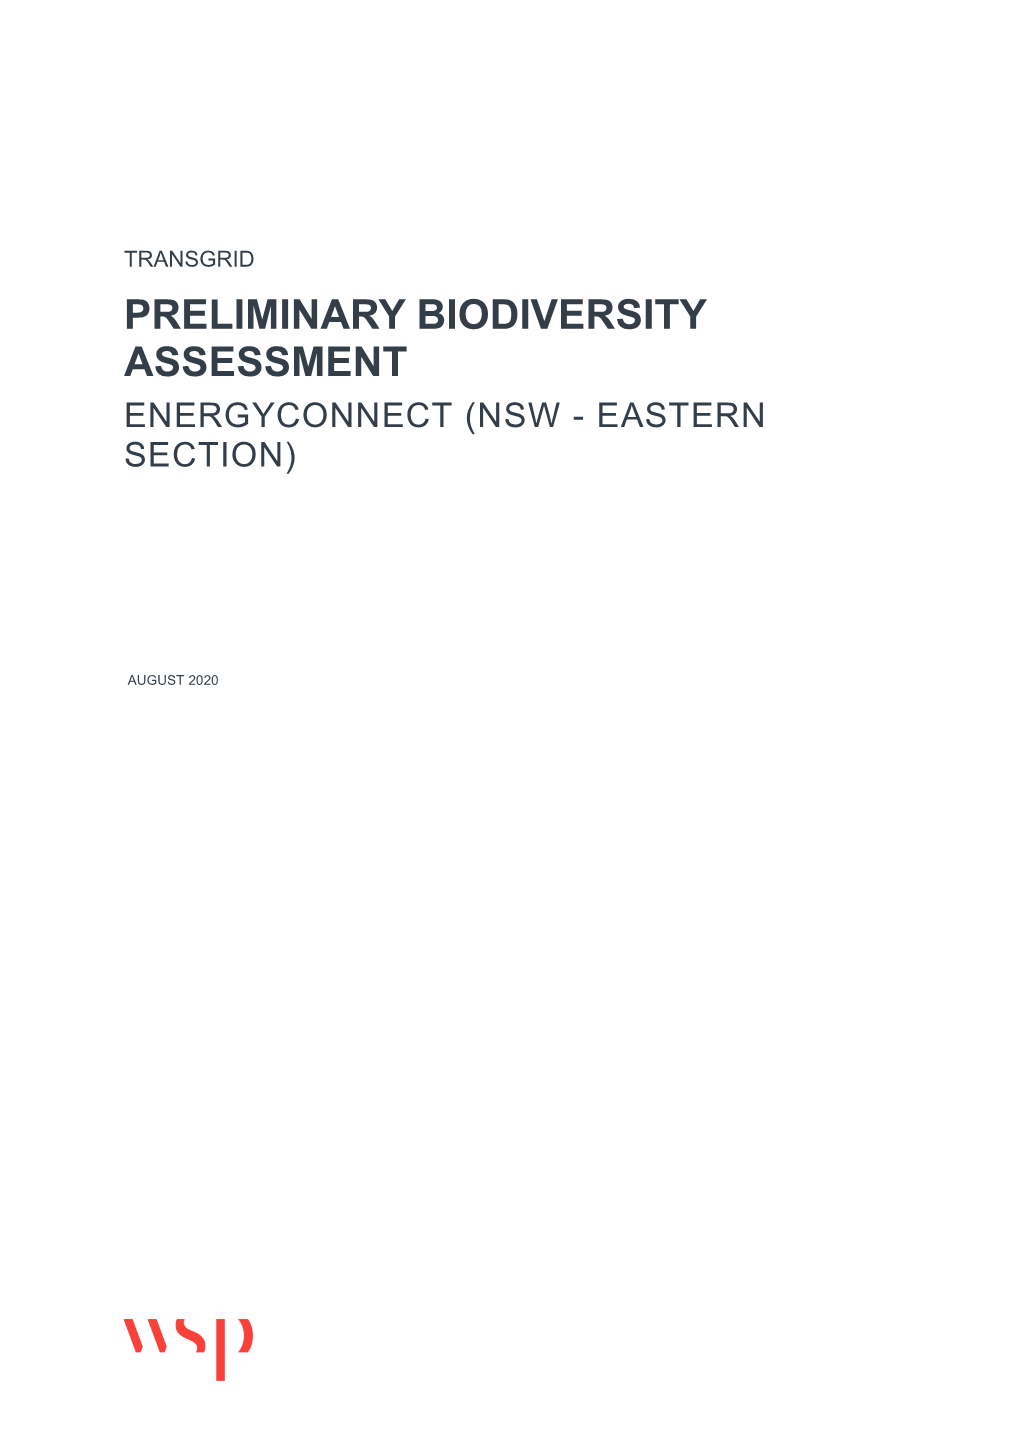 Preliminary Biodiversity Assessment Energyconnect (Nsw - Eastern Section)